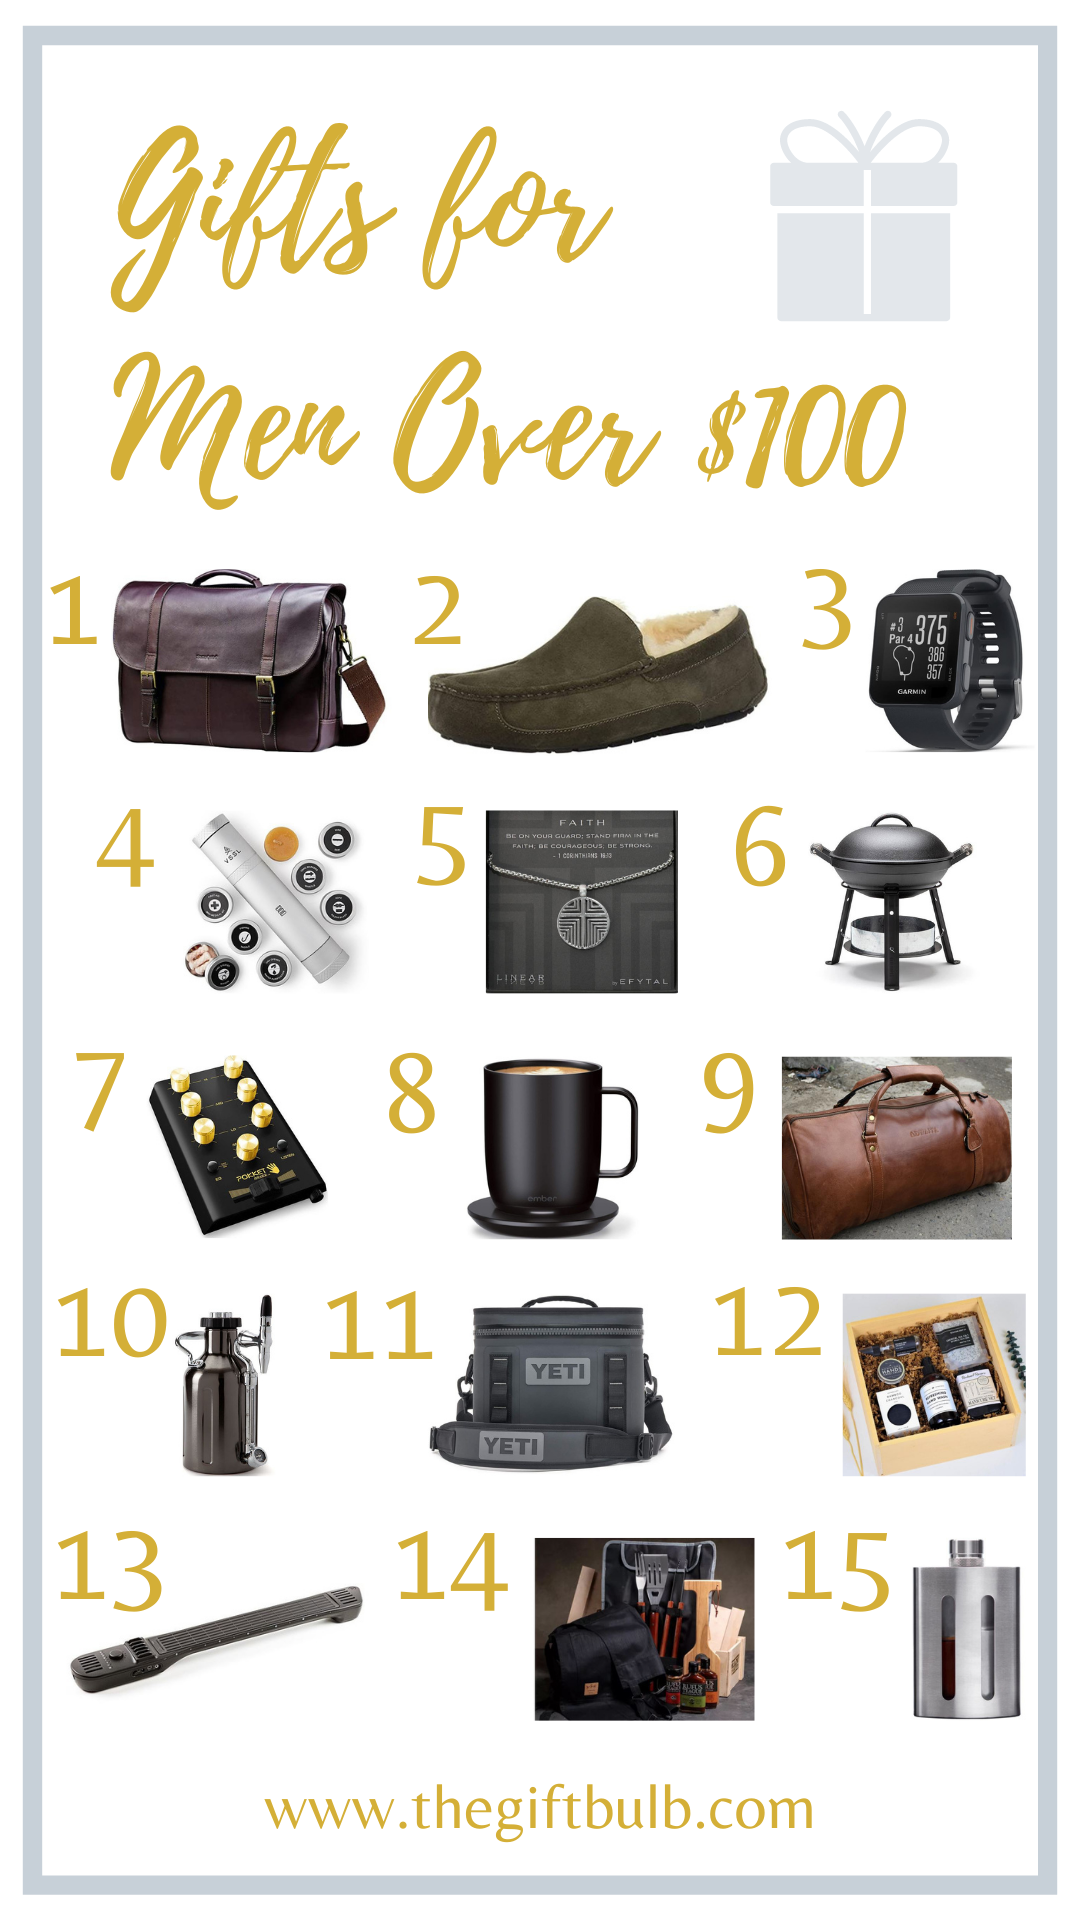 Gifts for Men Over $100